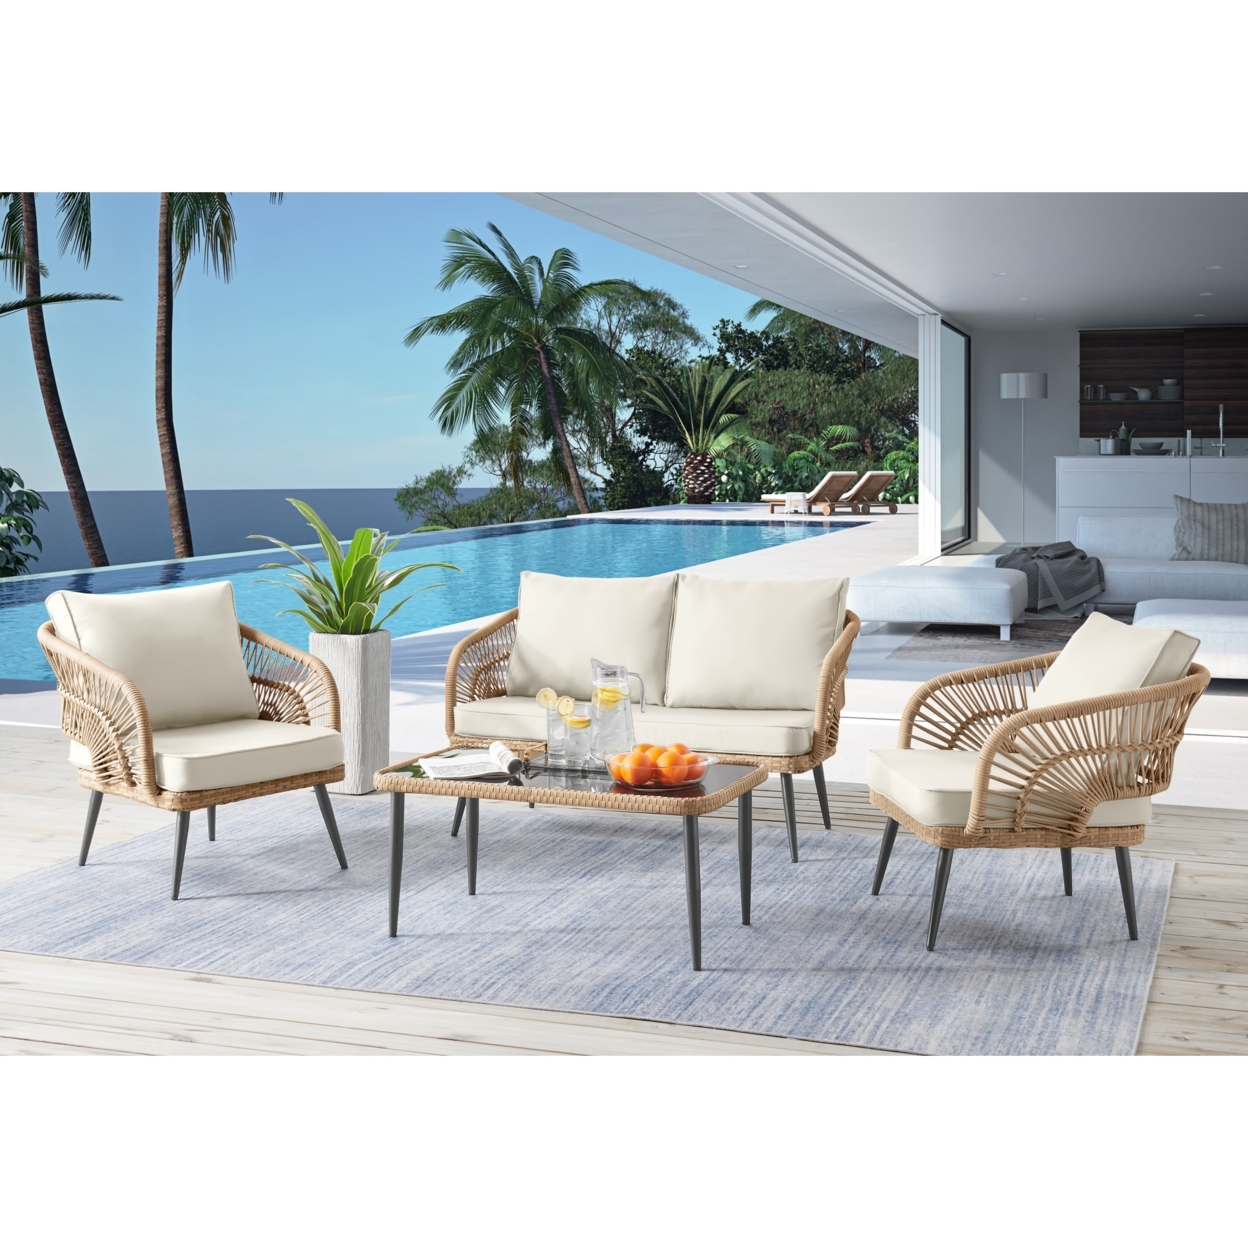 Javien Outdoor Set -All-Weather Faux Rattan Wicker Design, Removable And Washable Cushions - Teak/4 Seating